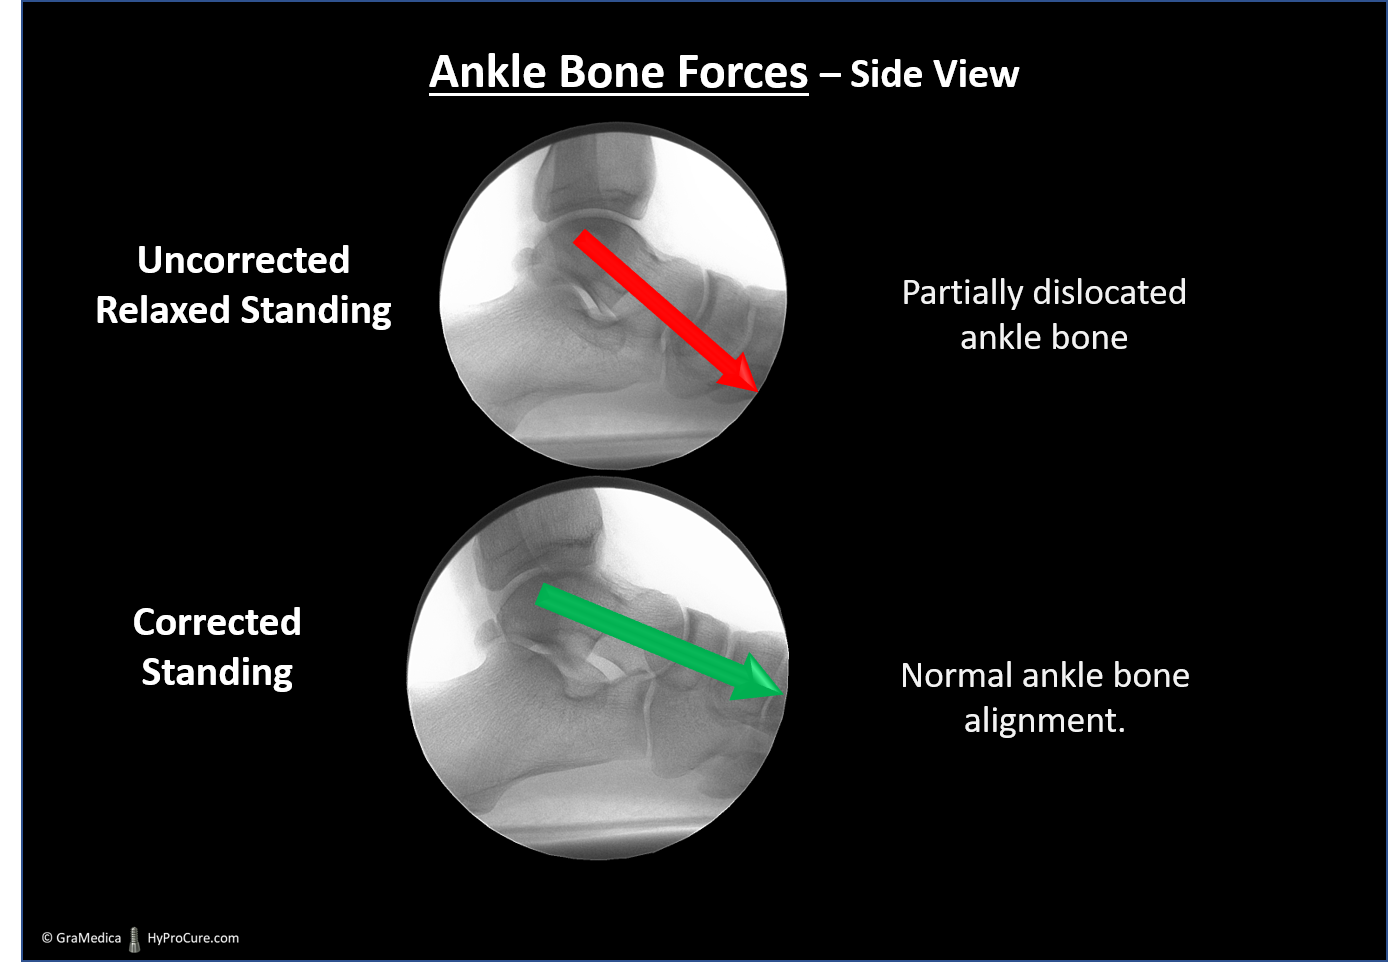 Side view x-ray showing difference between a stable and aligned ankle bone compared to a partially dislocated ankle bone